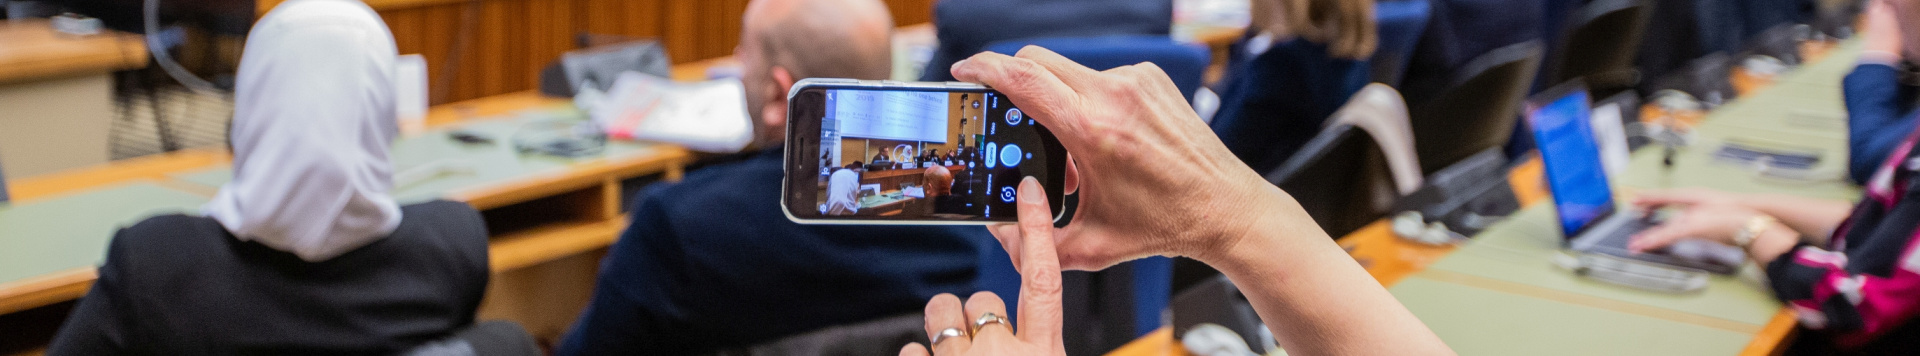 A person taking a photo on a mobile phone of a meeting taking place. Only the phone screen is clear, the rest of the image is blurry. 